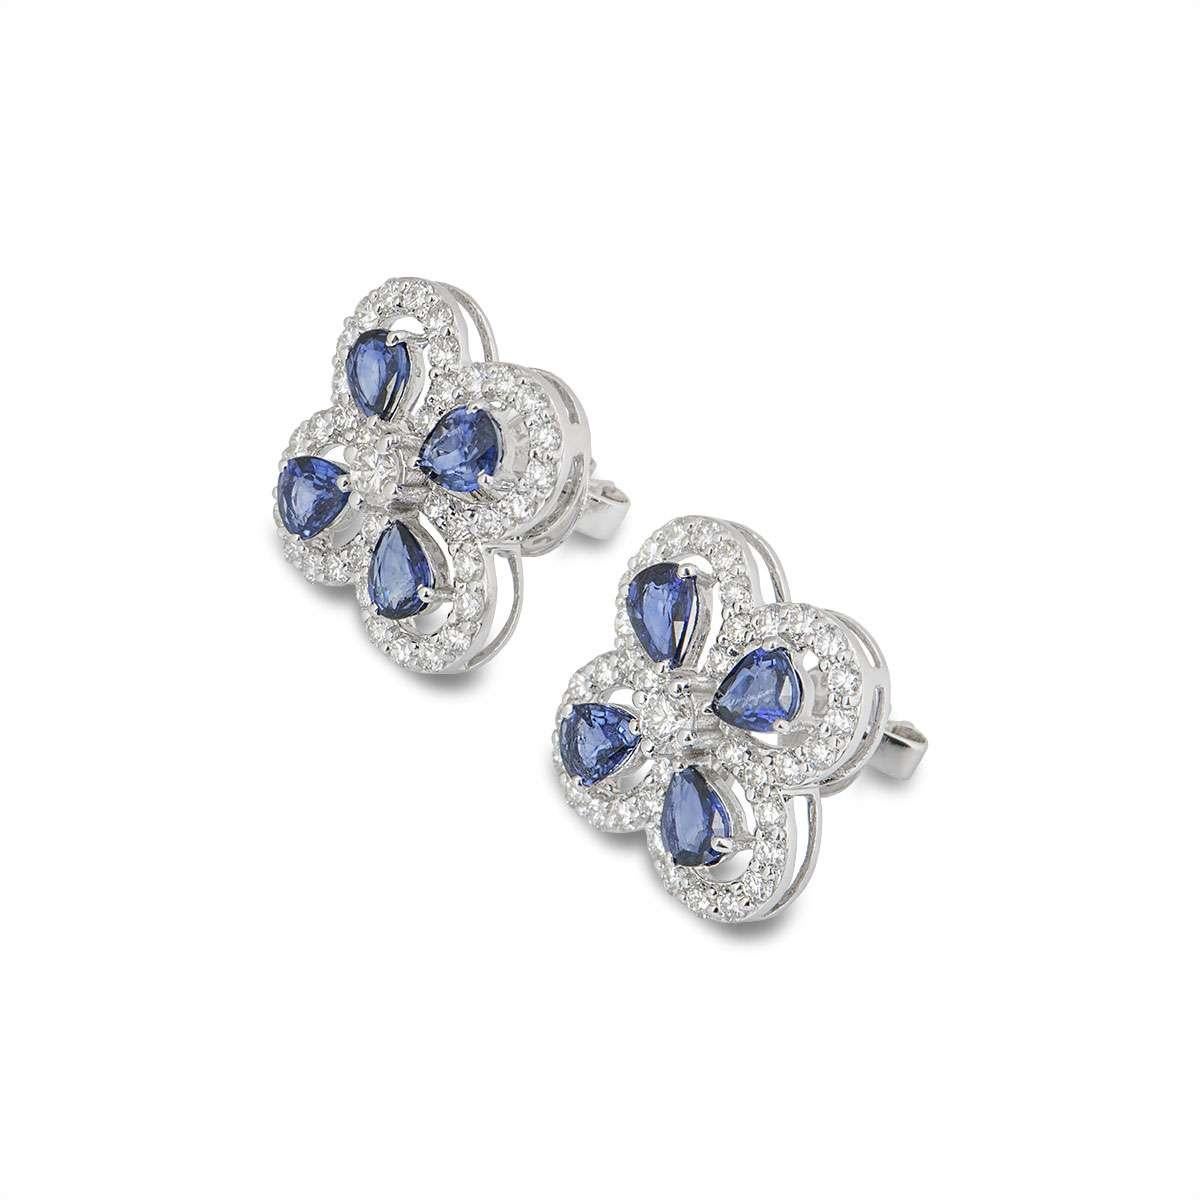 A pair of 18k white gold sapphire and diamond earrings. The openwork earrings are each set with 4 pear cut sapphires surrounding a single claw set round brilliant cut diamond. The outer boarder is pave set with round brilliant cut diamonds. The